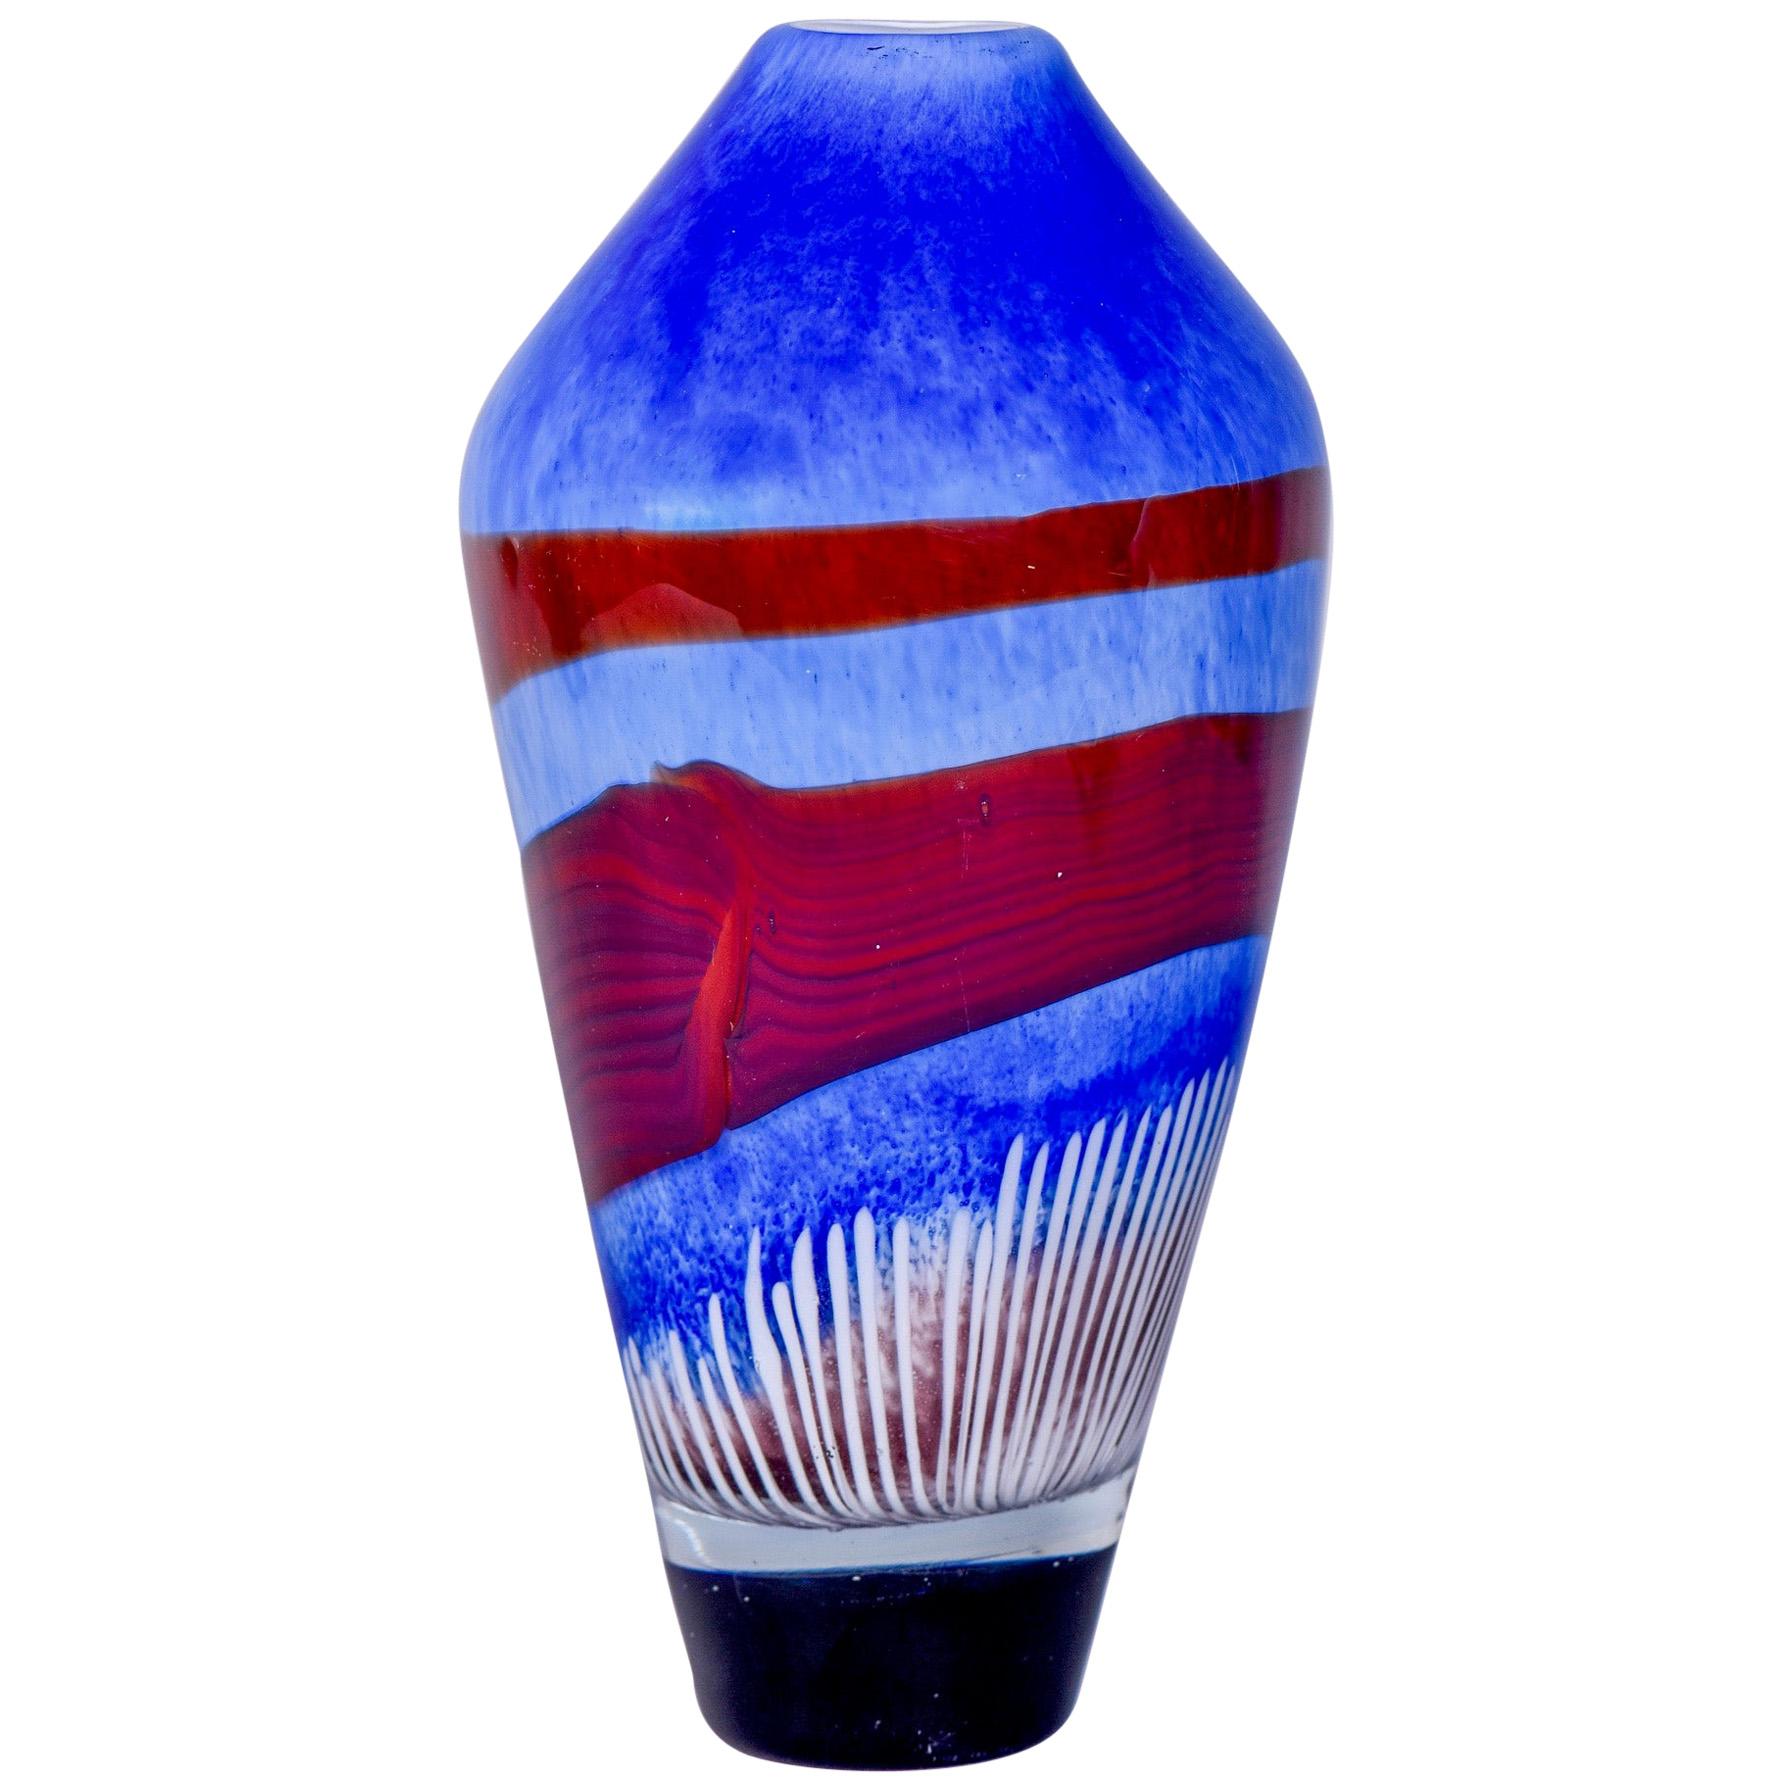 Tall Murano Glass Vase in Azure Blue with Burgundy and White Accents